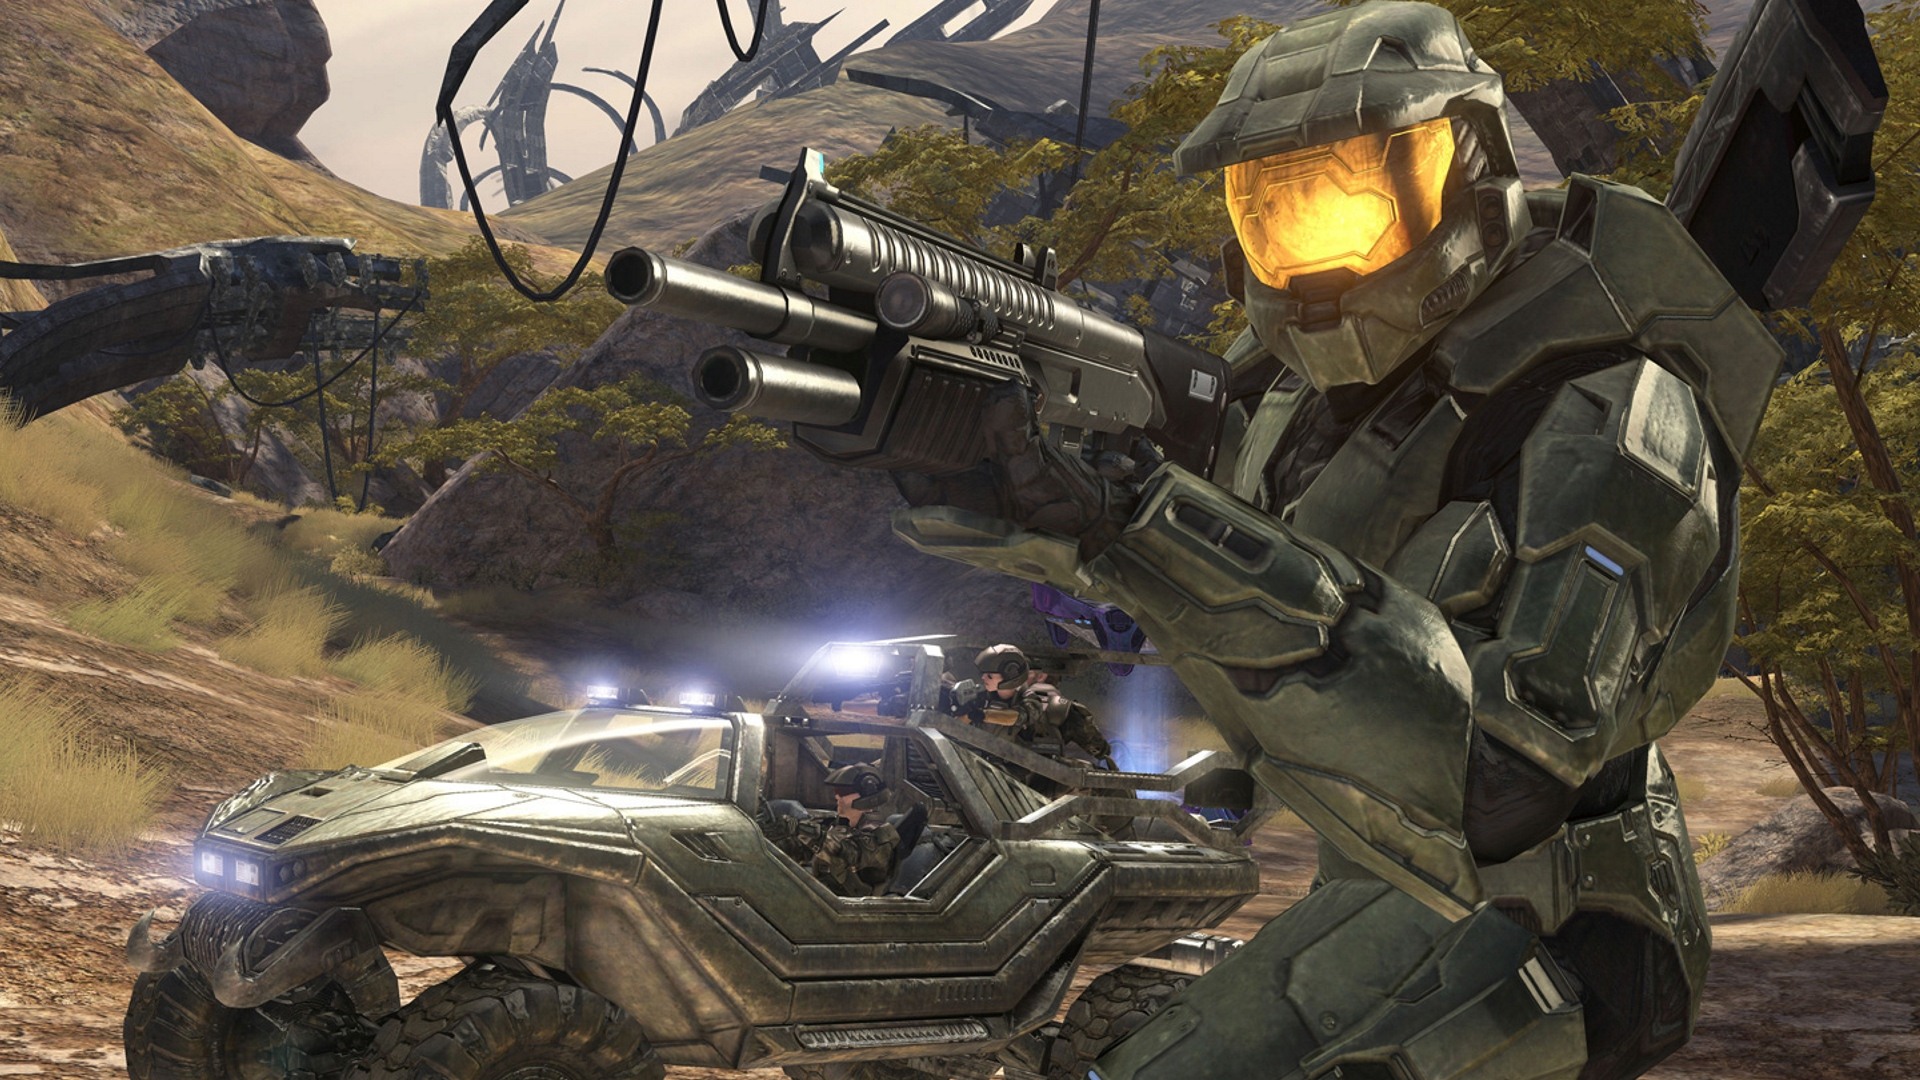 Halo game HD wallpapers #13 - 1920x1080